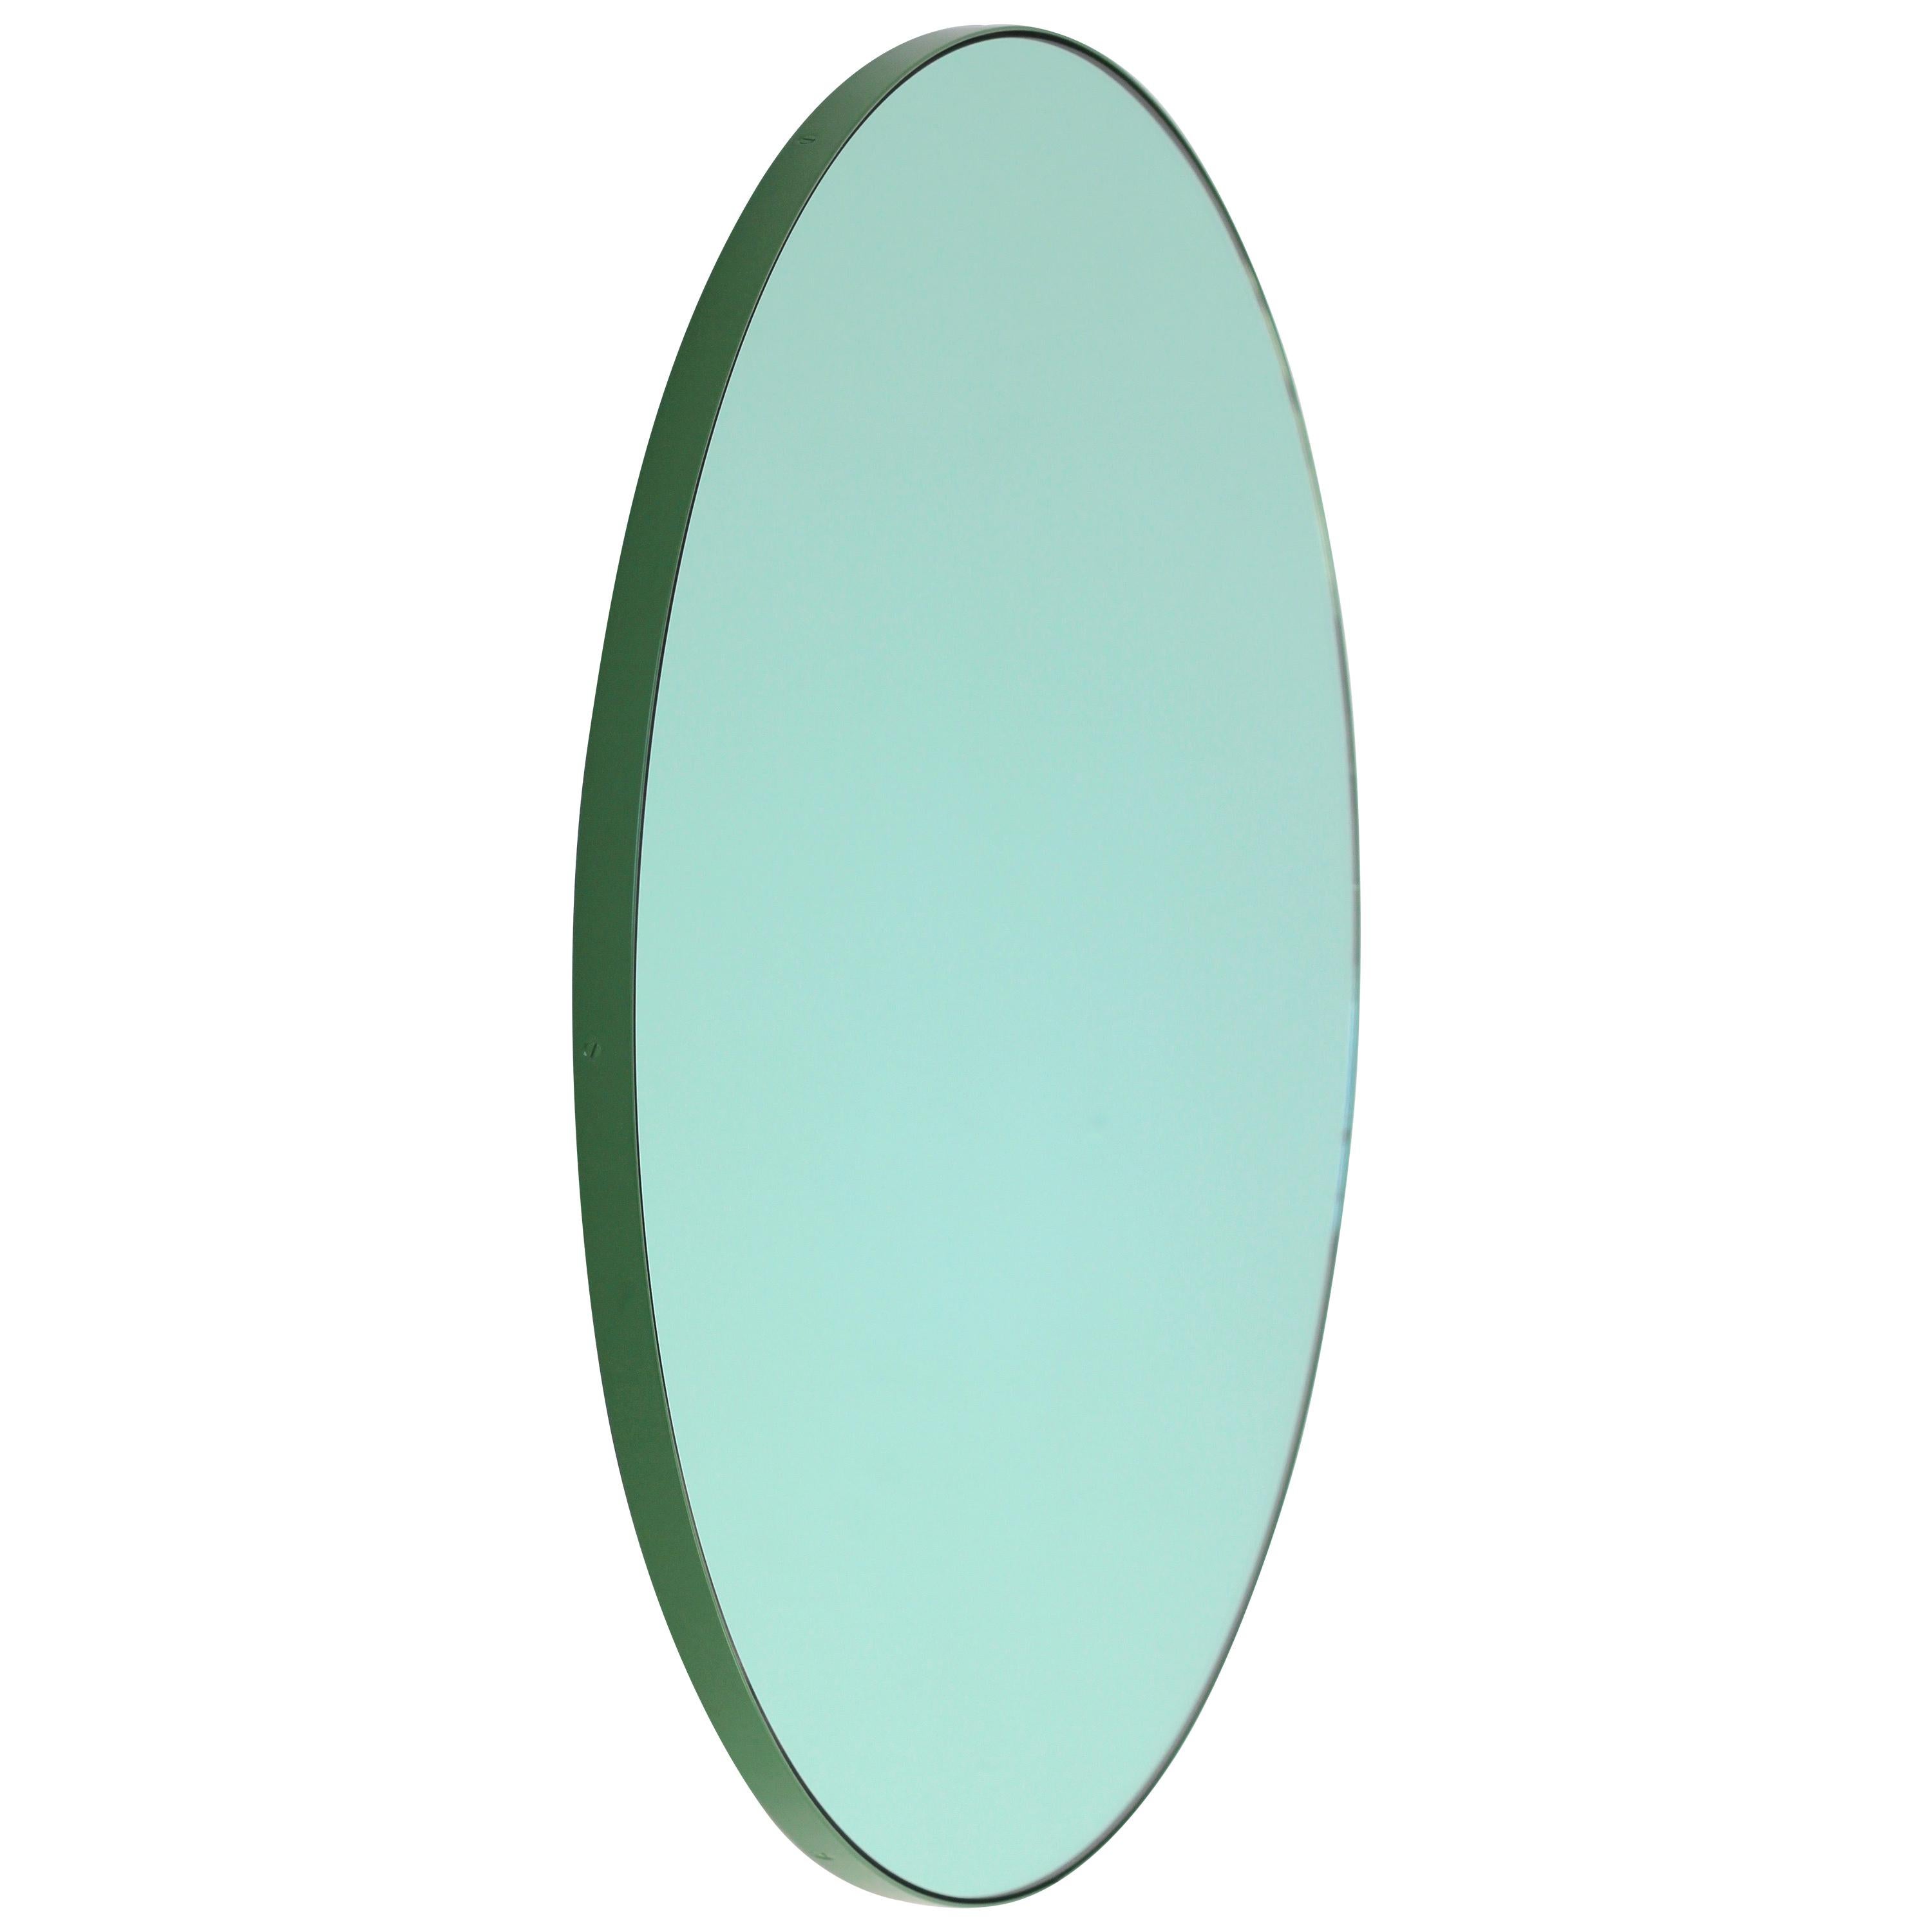 Orbis Green Tinted Customisable Round Mirror with Green Frame, Small